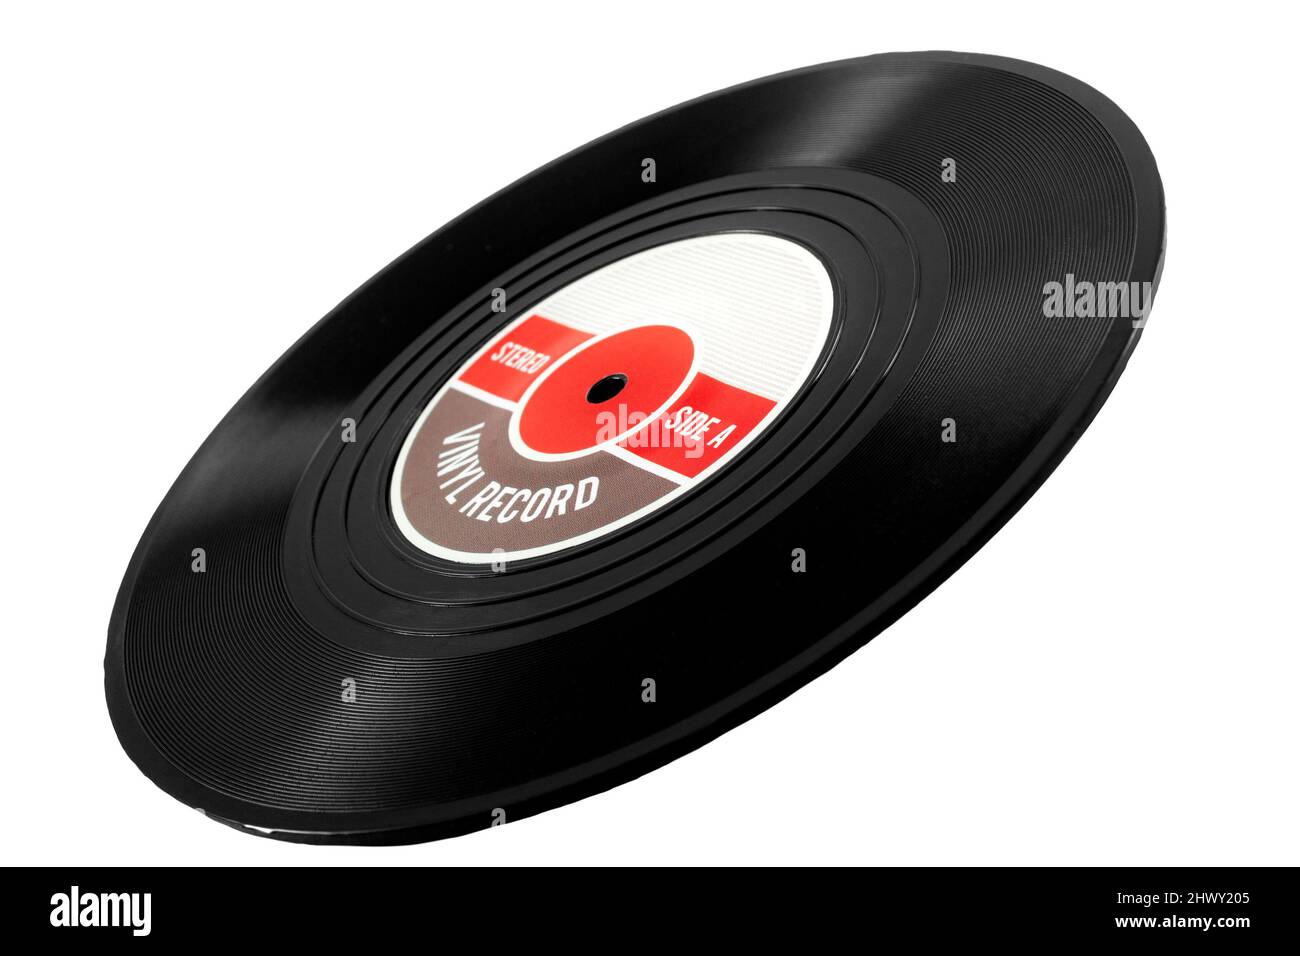 Obsolete sound recording technology, retro analogue medium and nostalgia concept with a tilted vinyl record isolated on white background leaning on it Stock Photo